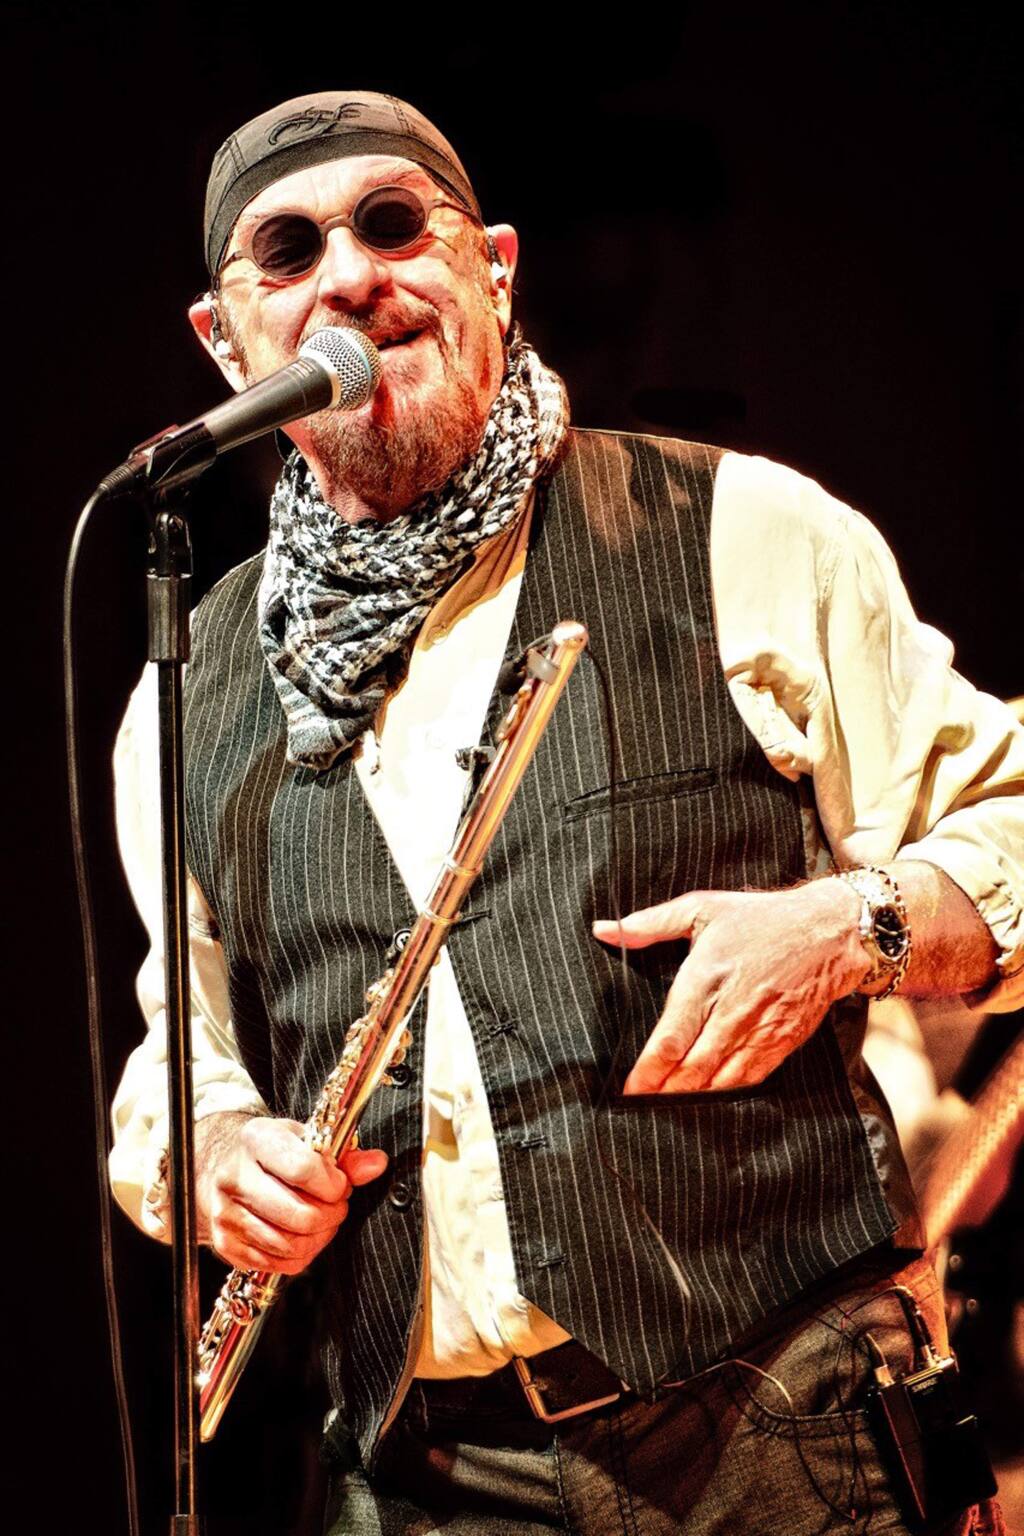 Ian Anderson brings 'Jethro Tull' to Luther Burbank Center